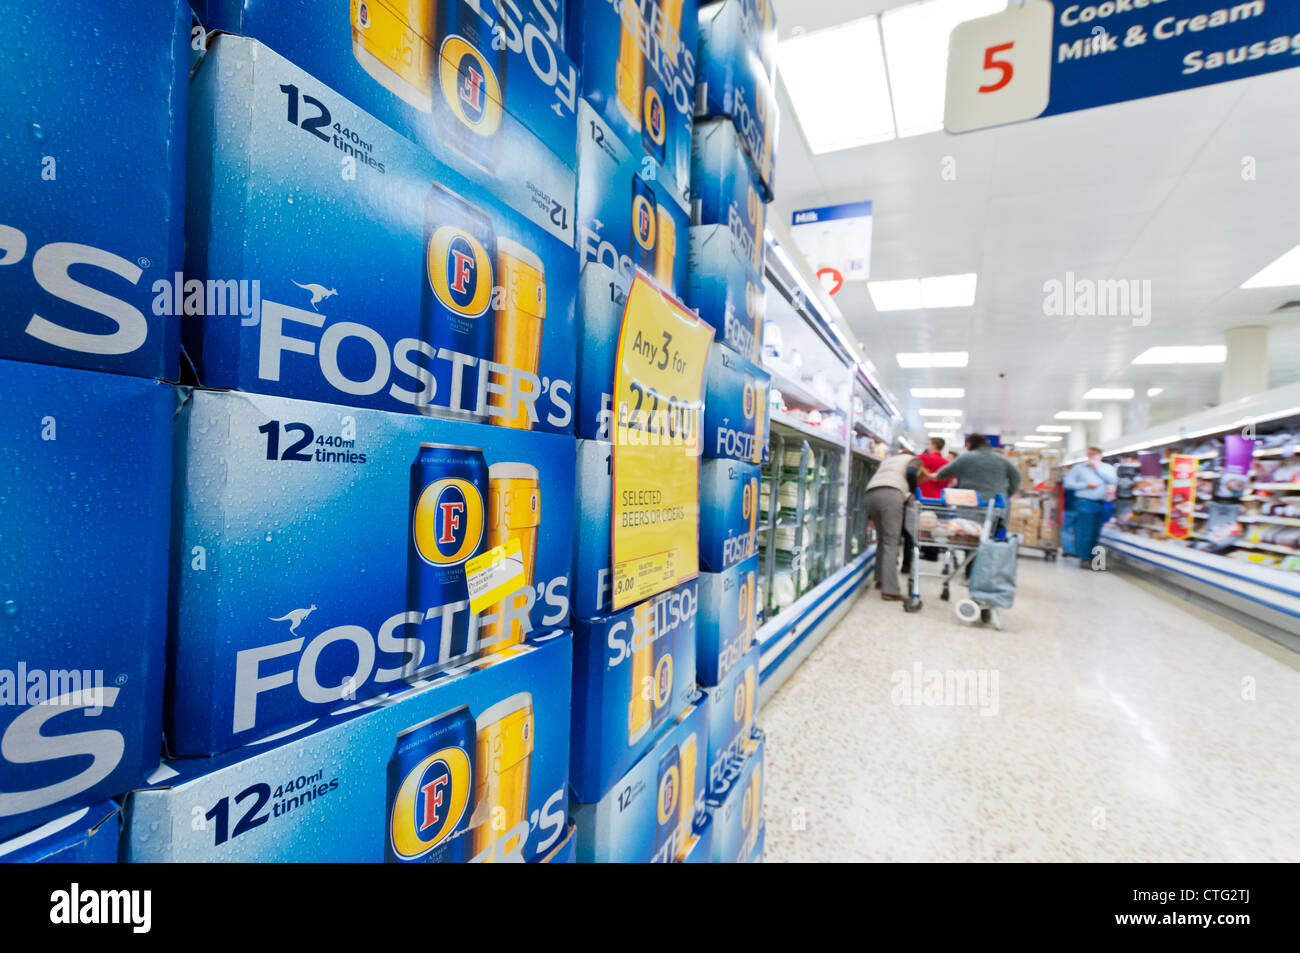 Boxes of Fosters stacked up in aisle, Tesco Supermarket, UK Stock Photo